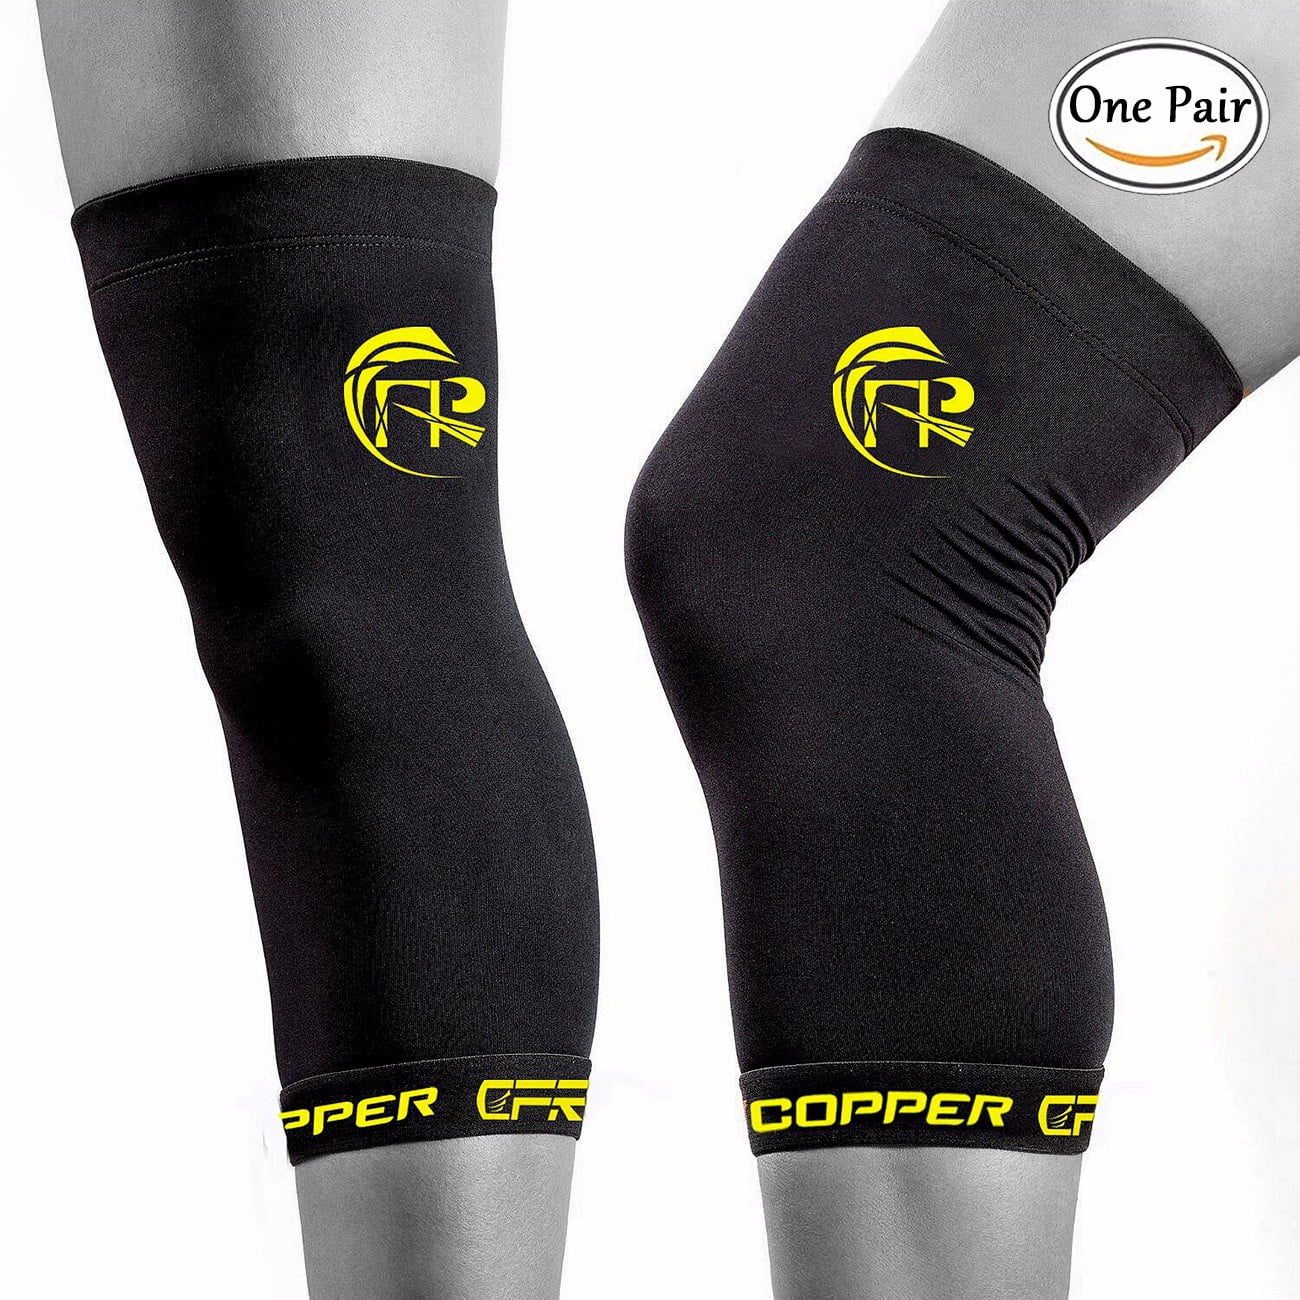 Copper Elbow Knee Calf Support Fit Arm Sleeve Wrap Elastic Compressiom Brace CFR 